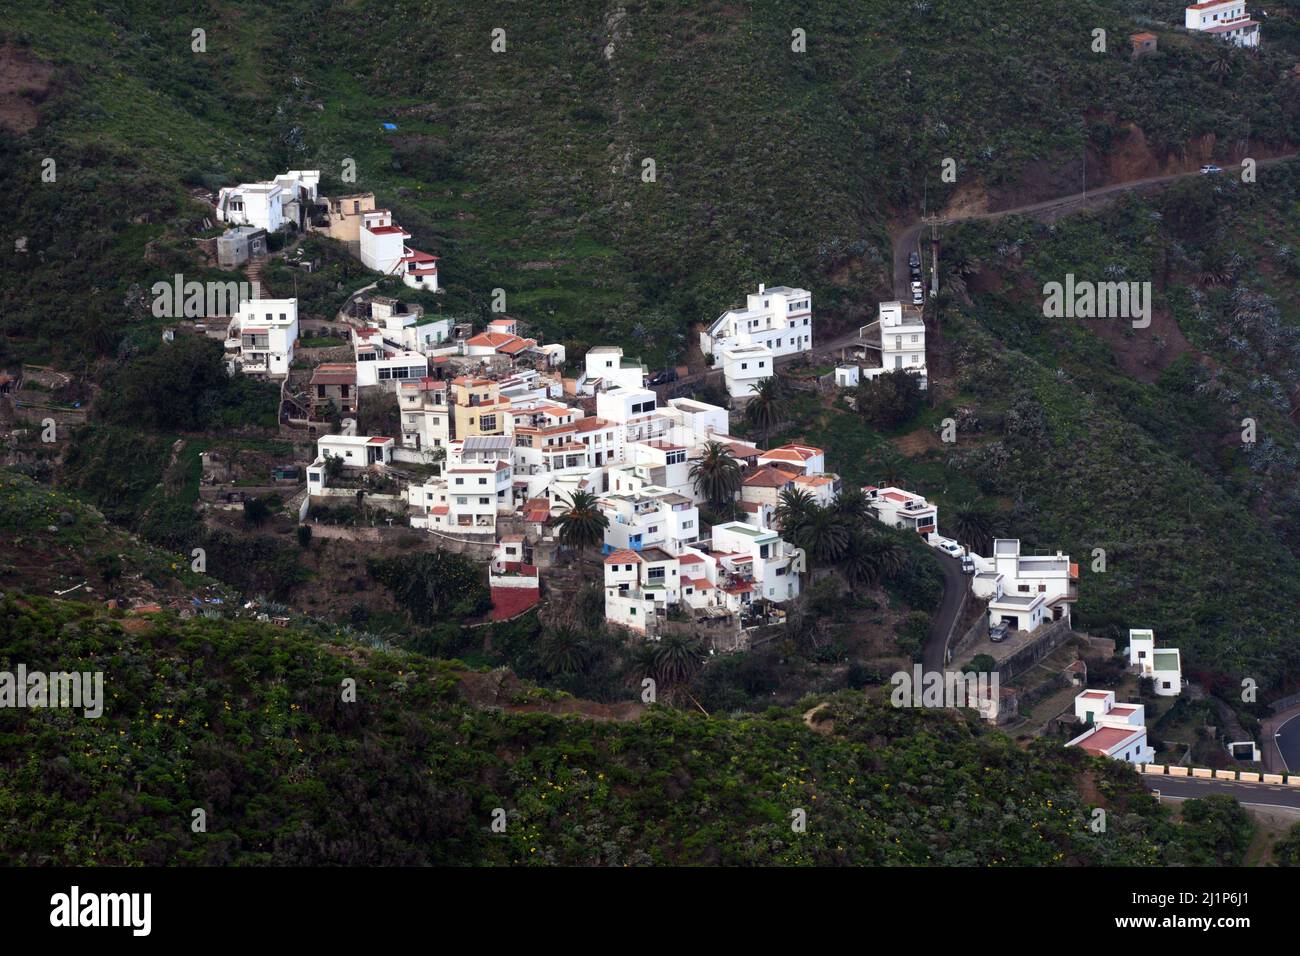 The Spanish village of Taganana nestled in the Anaga Mountains on the north coast of the island of Tenerife, Anaga Rural Park, Canary Islands, Spain. Stock Photo